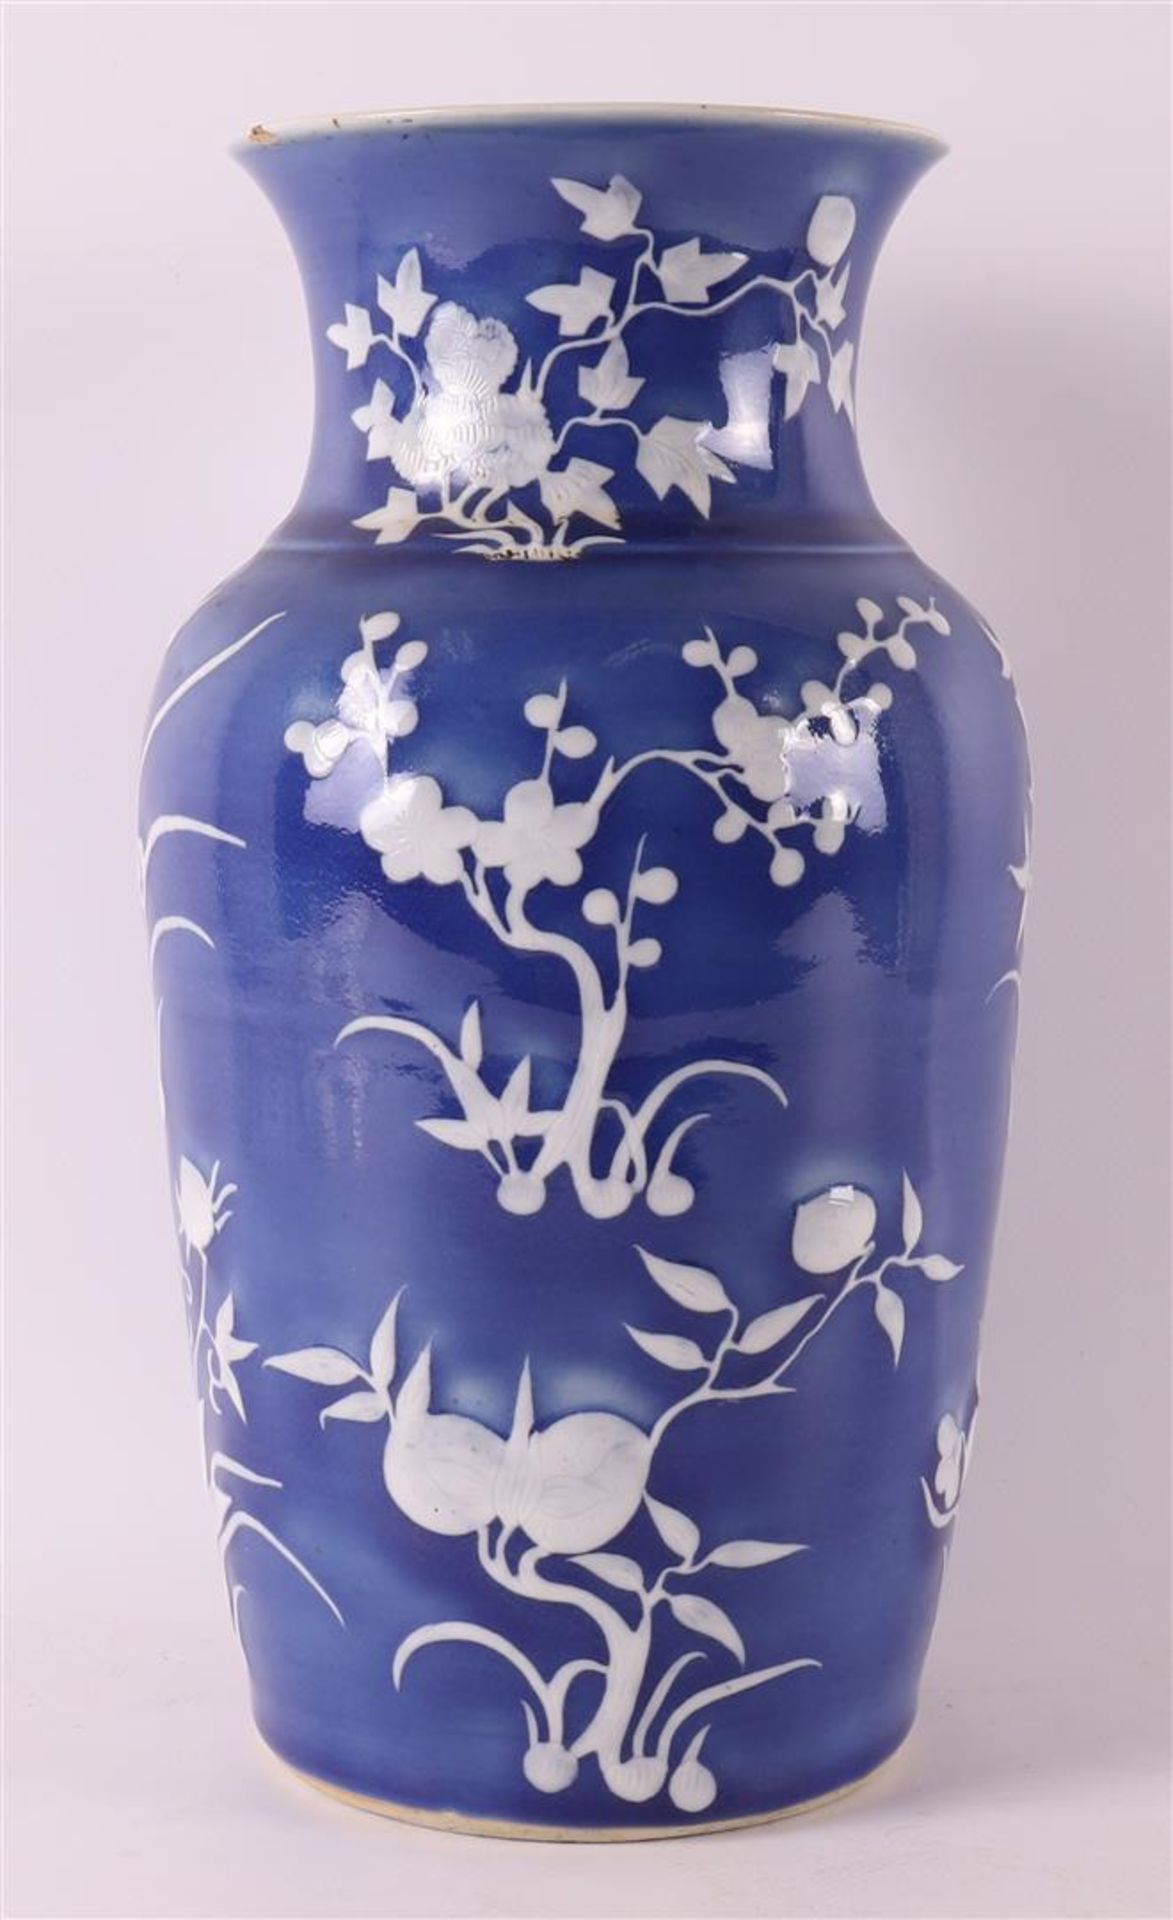 A porcelain vase with white relief floral decoration on a blue background, China